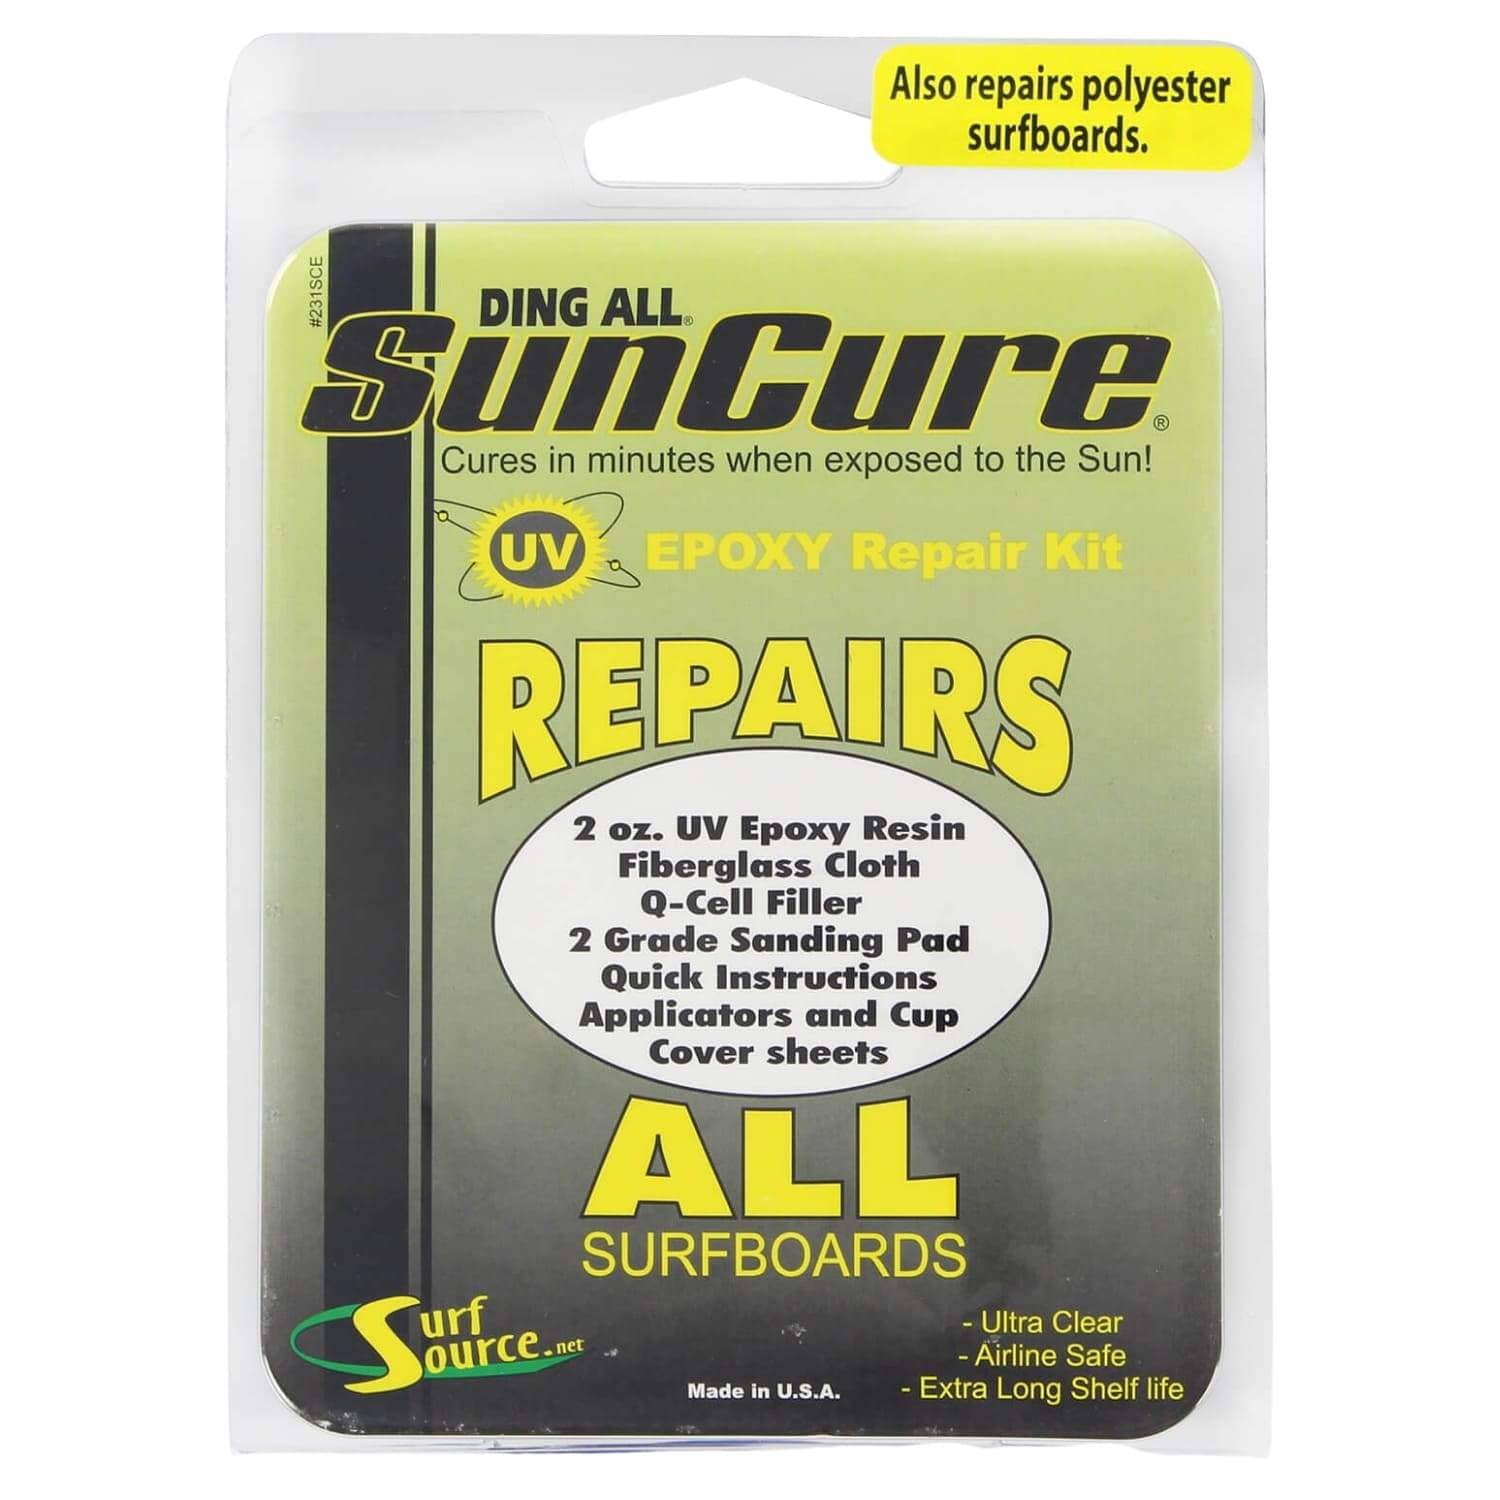 Ding All Sun Cure Repairs All Surfboards Kit